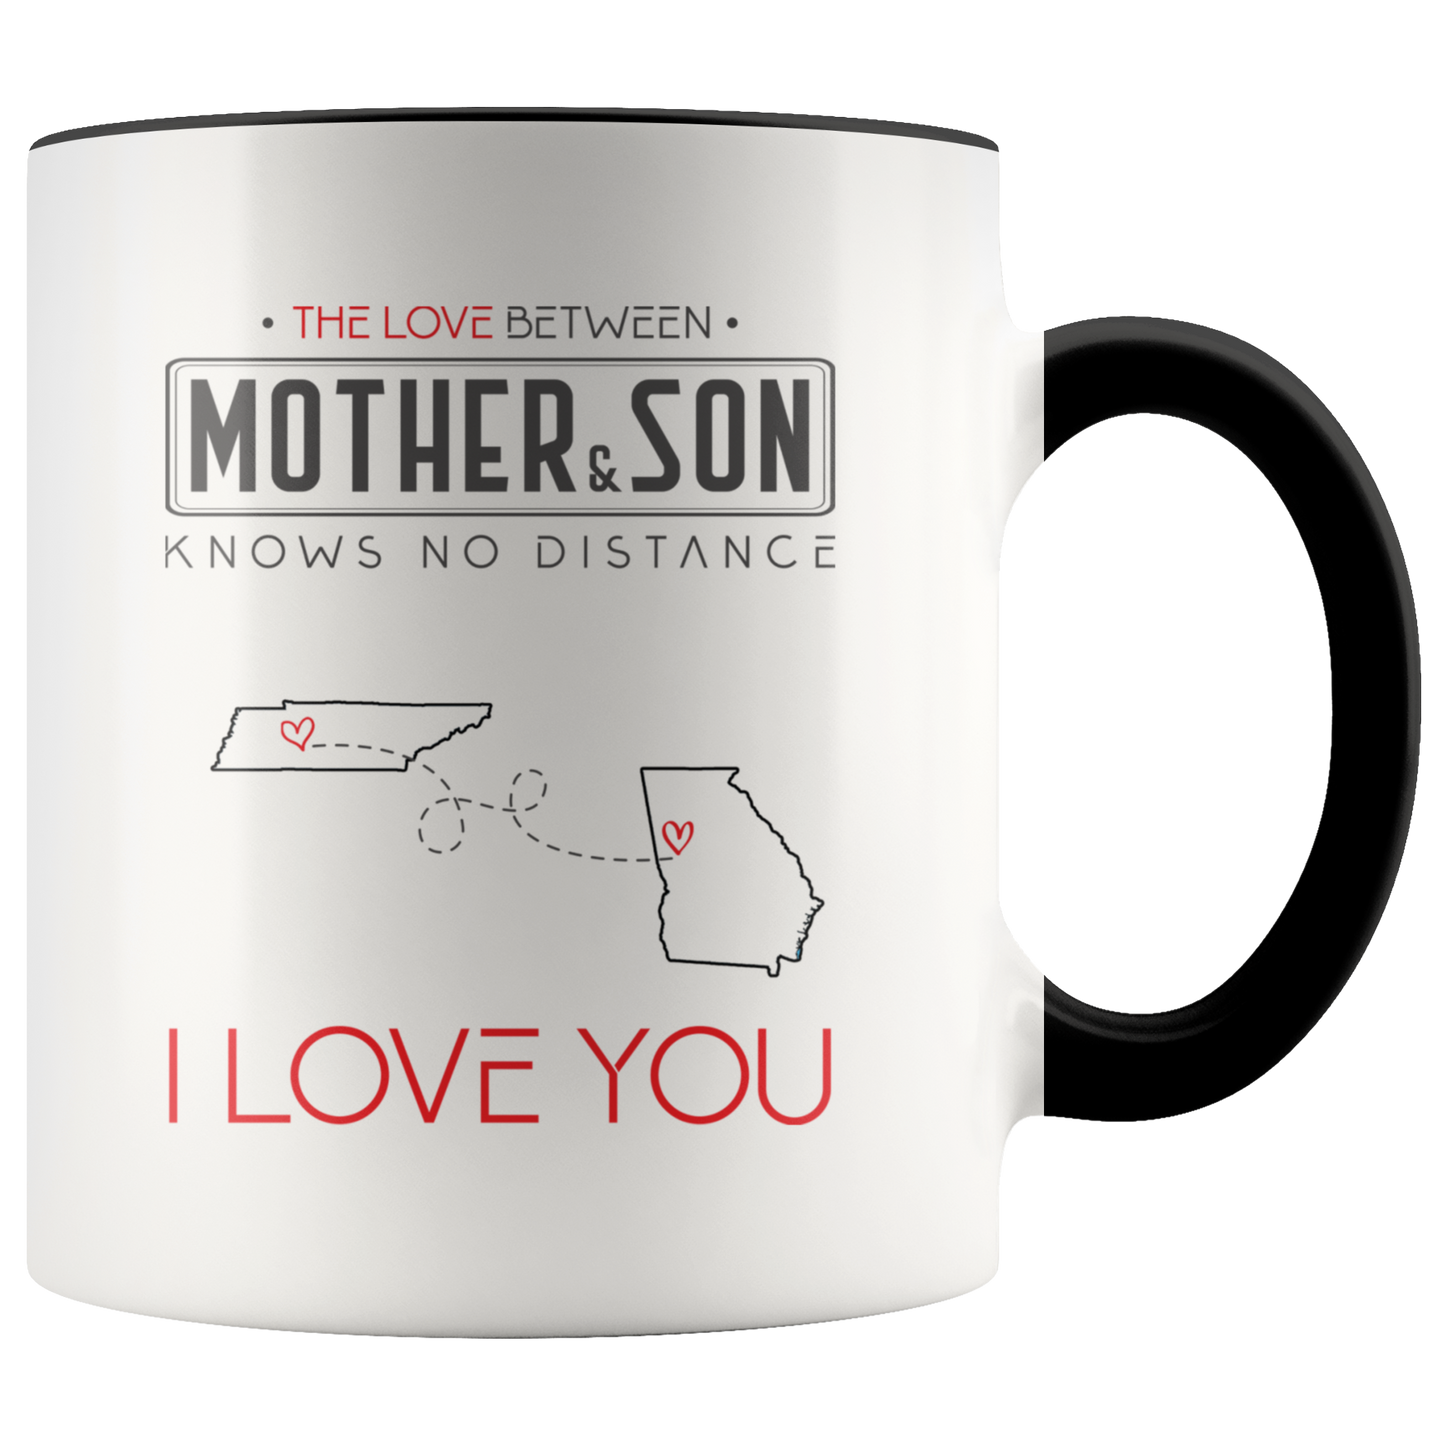 ND-21315793-sp-23363 - Mom And Son Accent Mug 11 oz Red - The Love Between Mother A